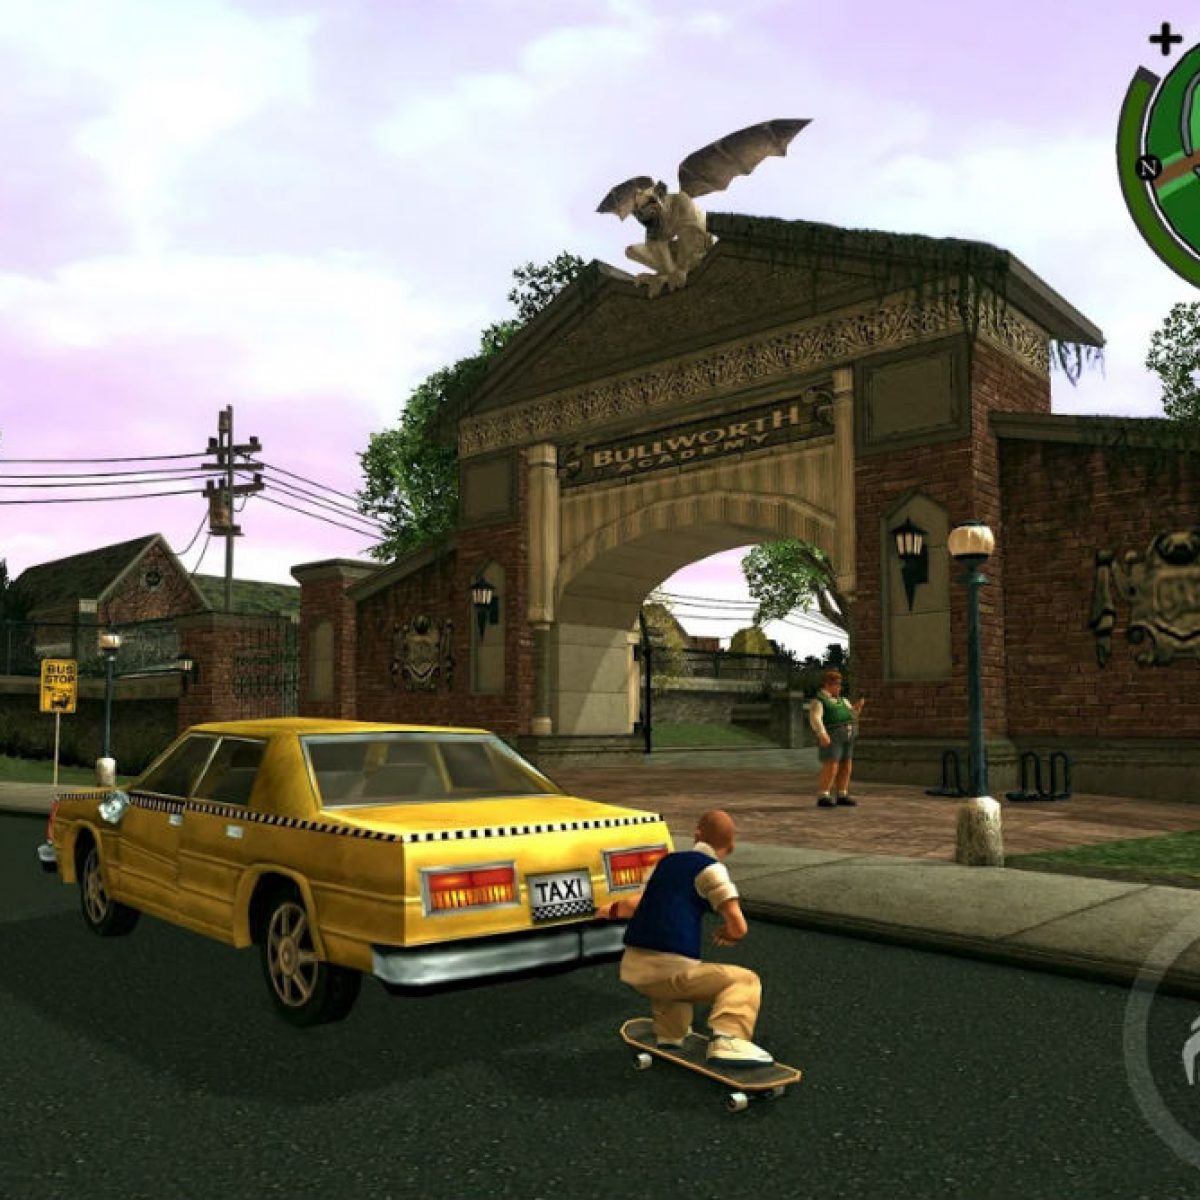 Surprise surprise, Bully: Anniversary Edition makes it to Android